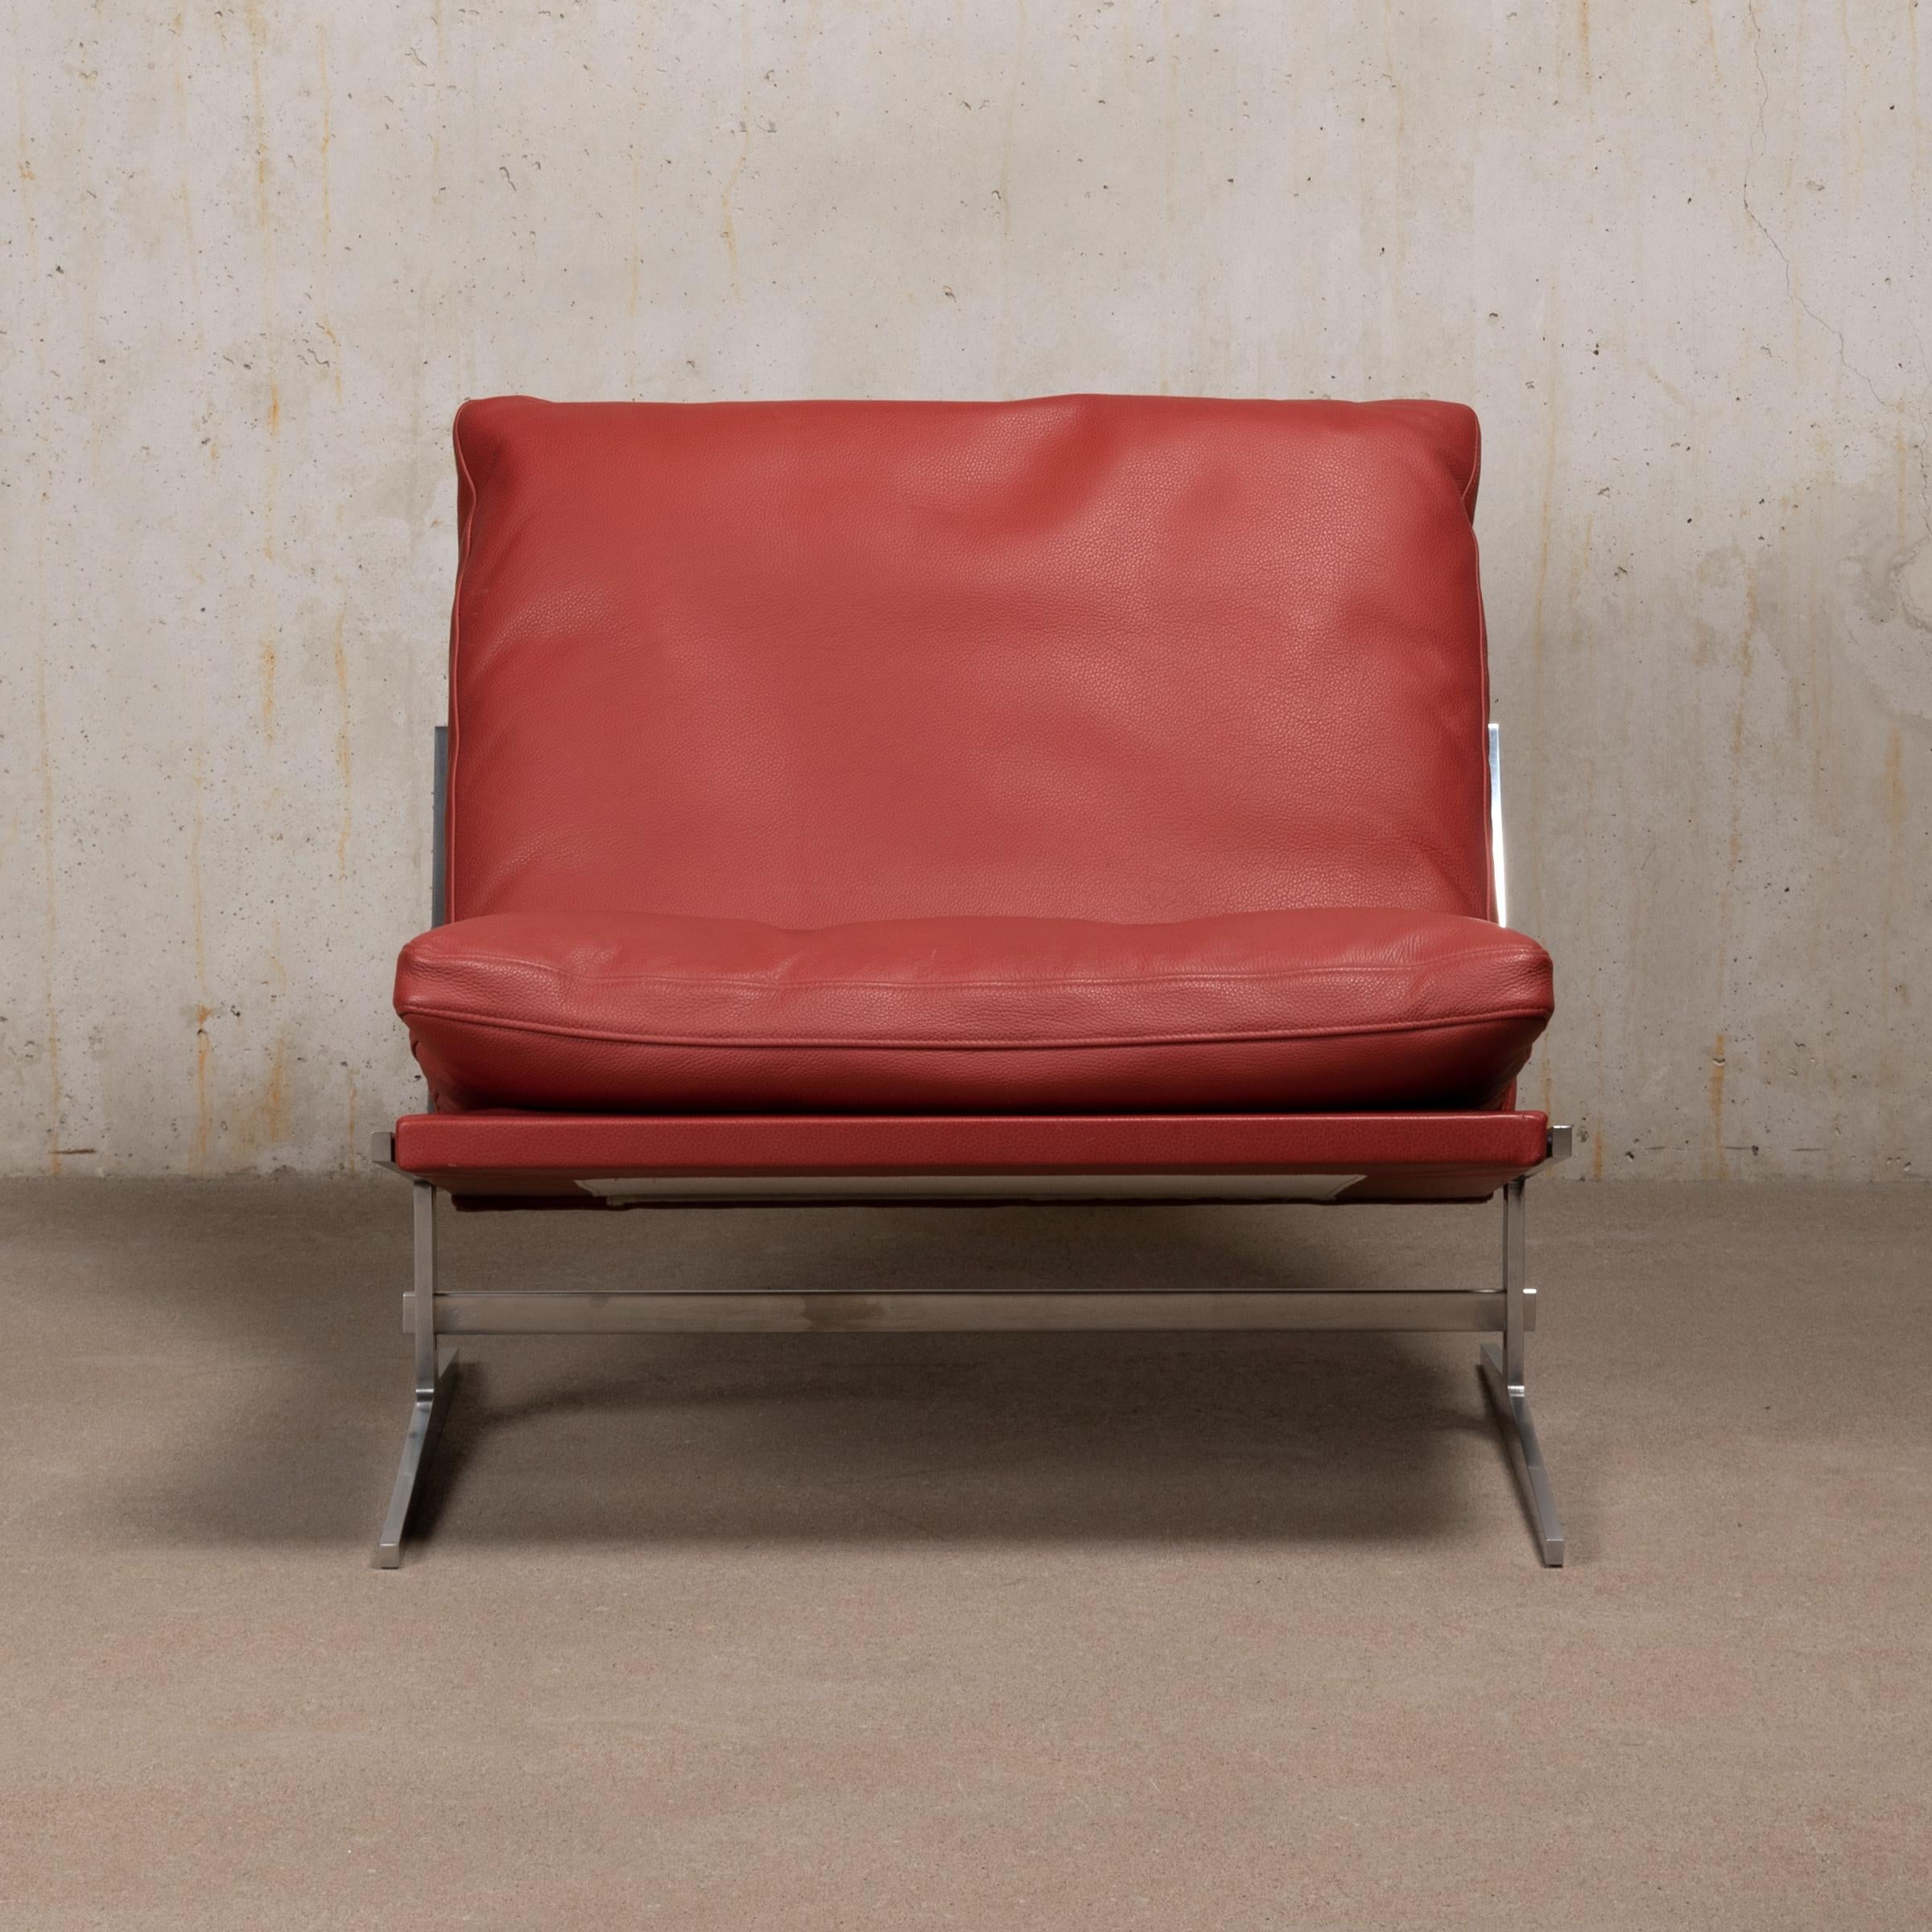 Polished Pair of Kastholm & Fabricius BO-561 Lounge Chairs in Ruby Red Leather by Bo-Ex